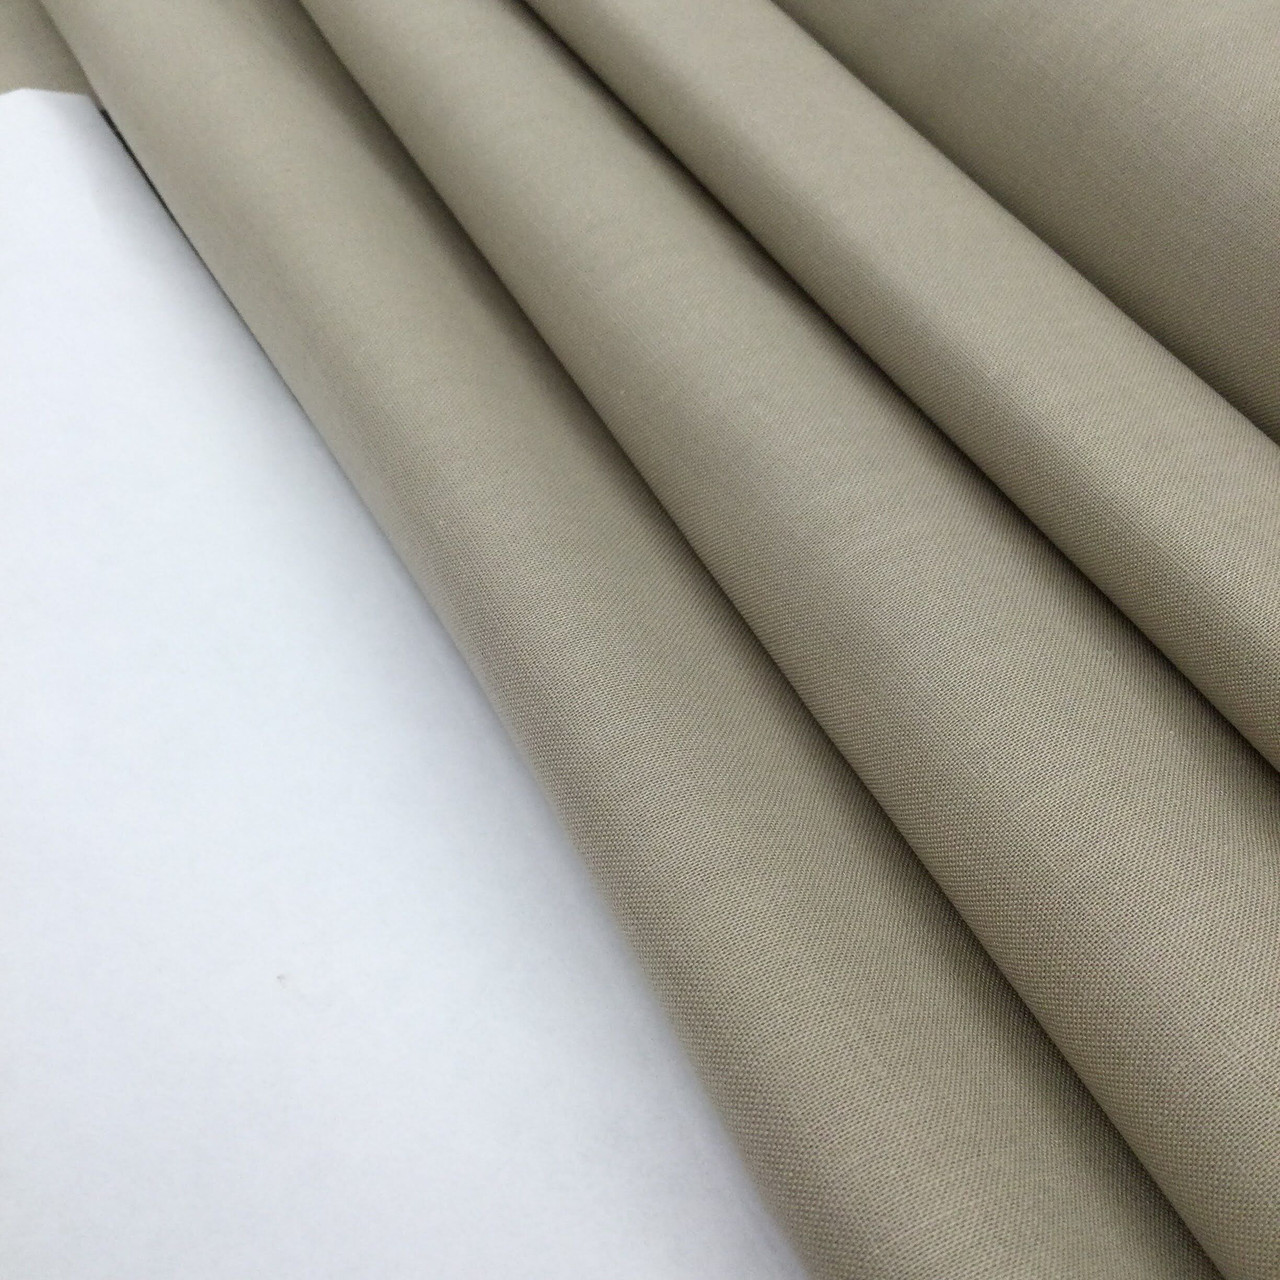 Light Sandstone Green, Neutral, Solid, Quilting Fabric, 100% Cotton, 44 wide